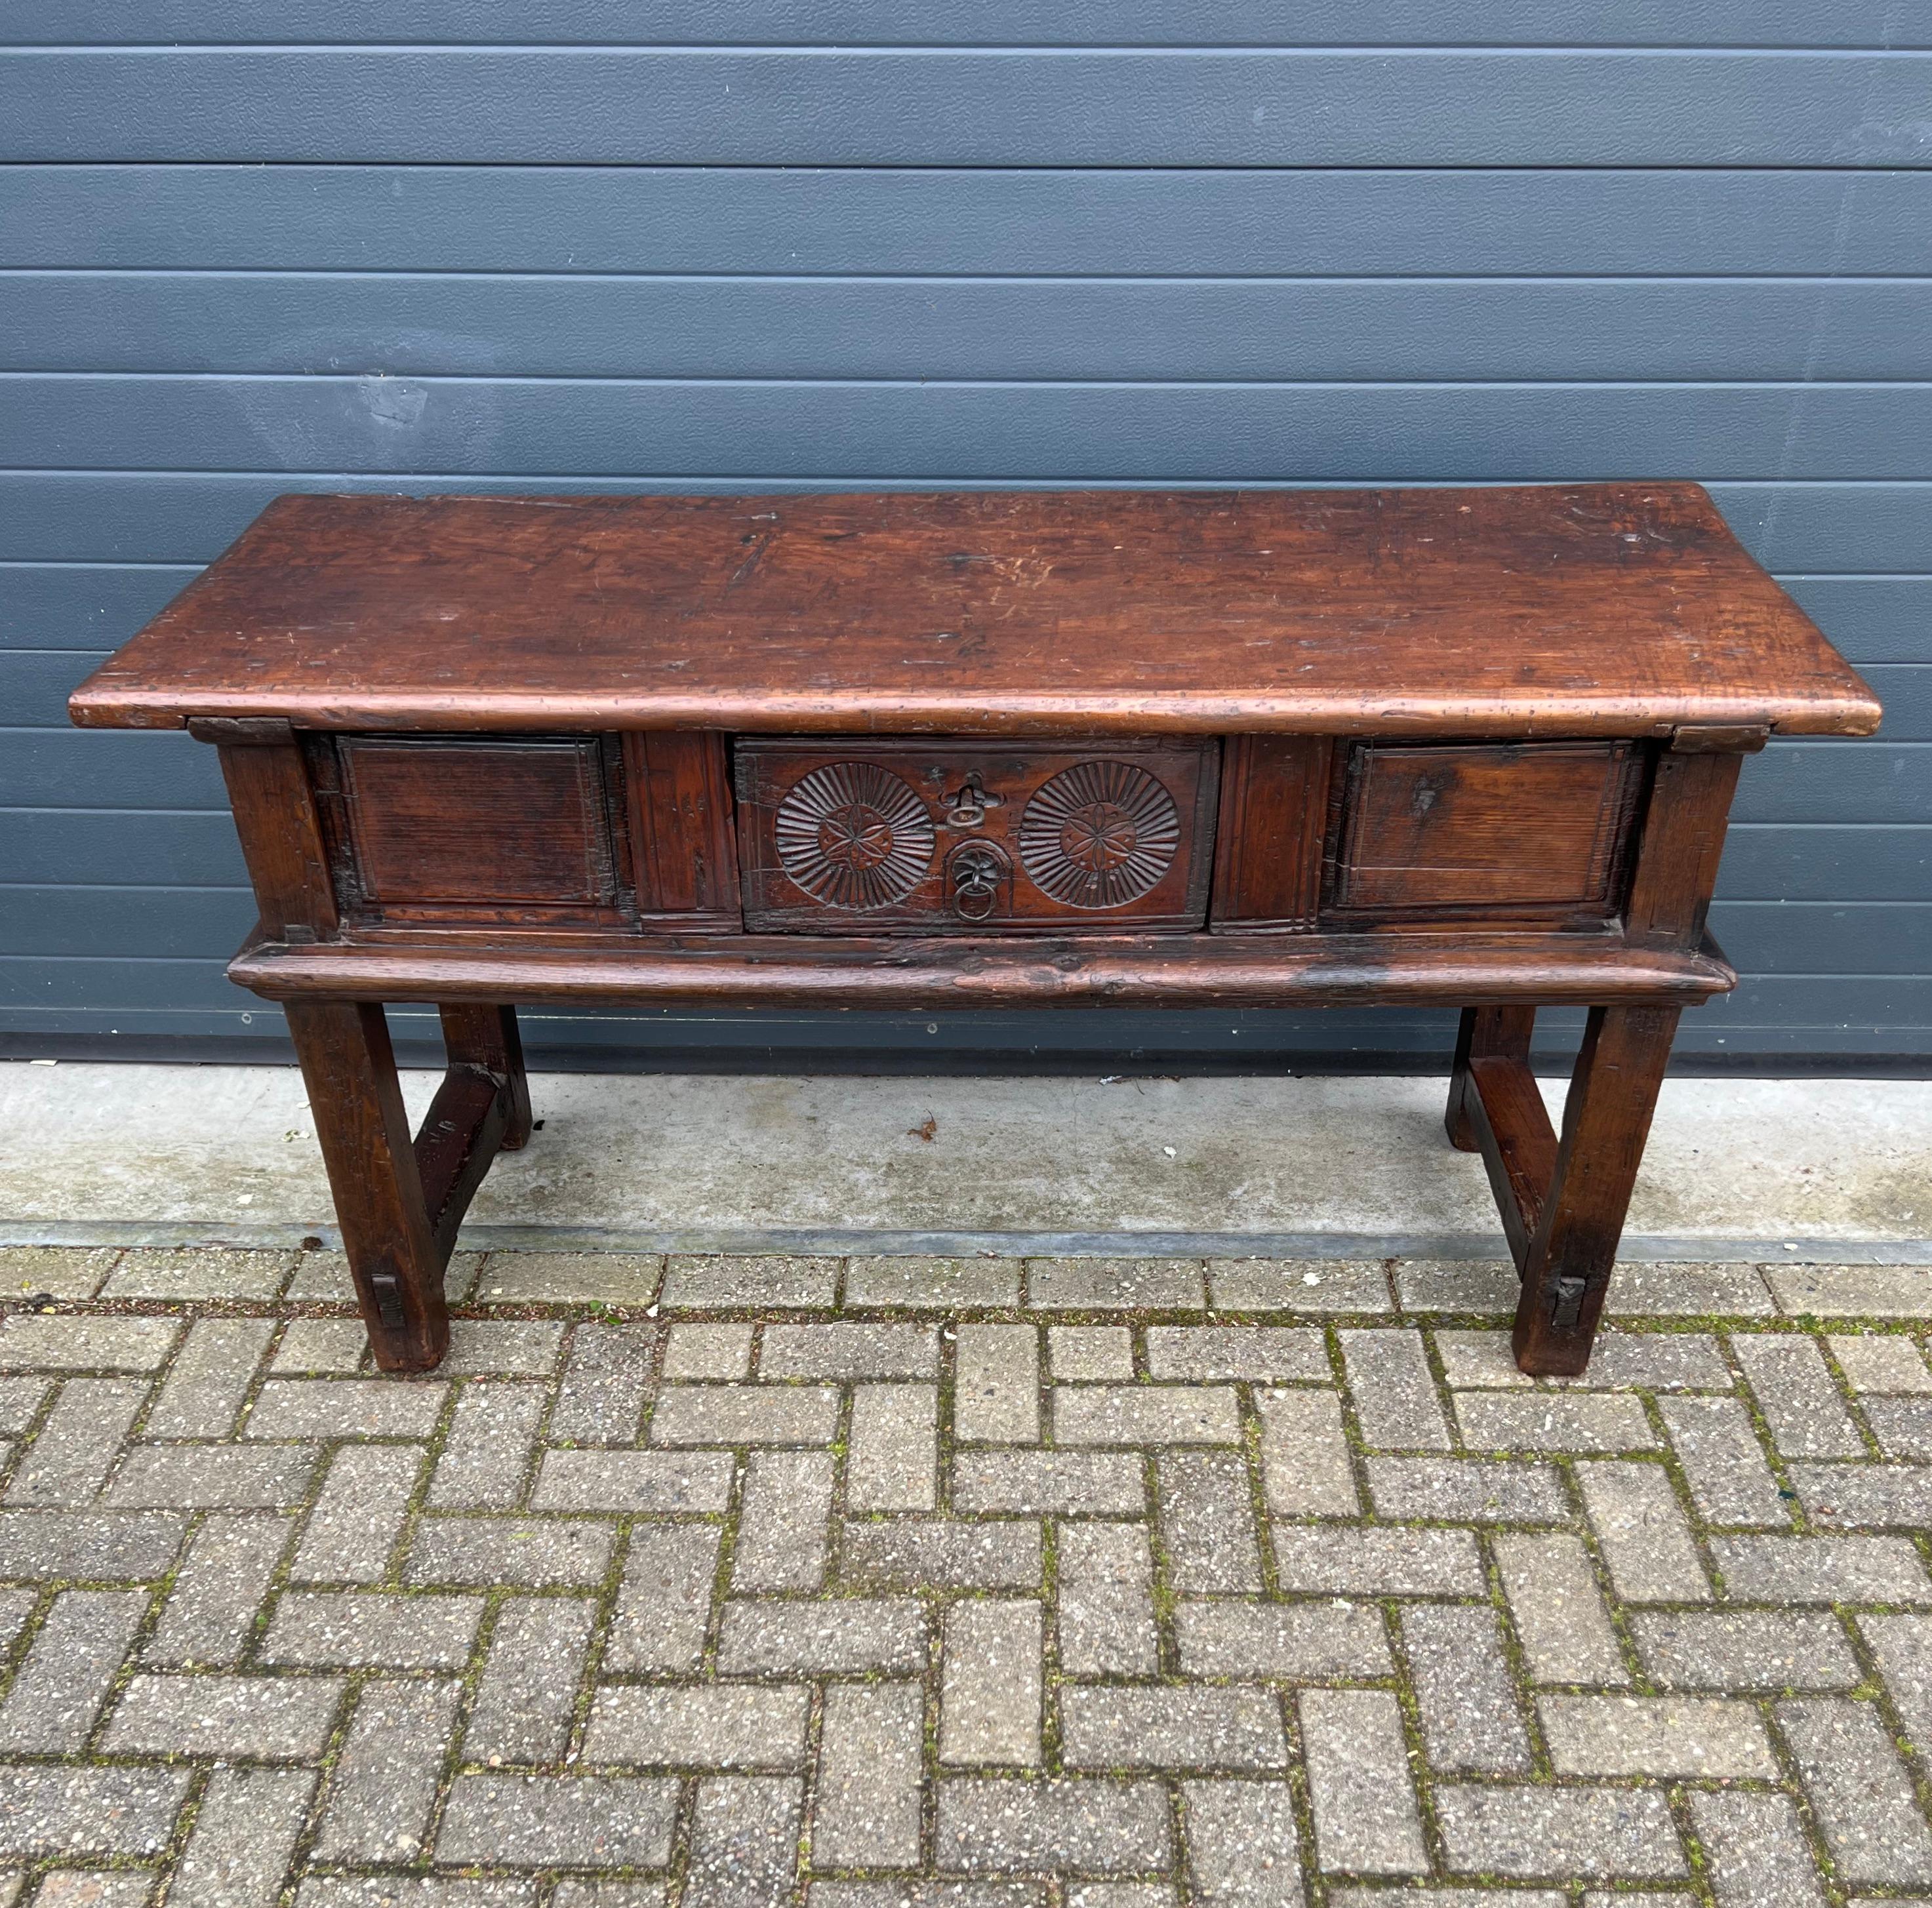 Antique and Rustic Mid 1700s Carved Chestnut Spanish Countryside Console Table For Sale 2